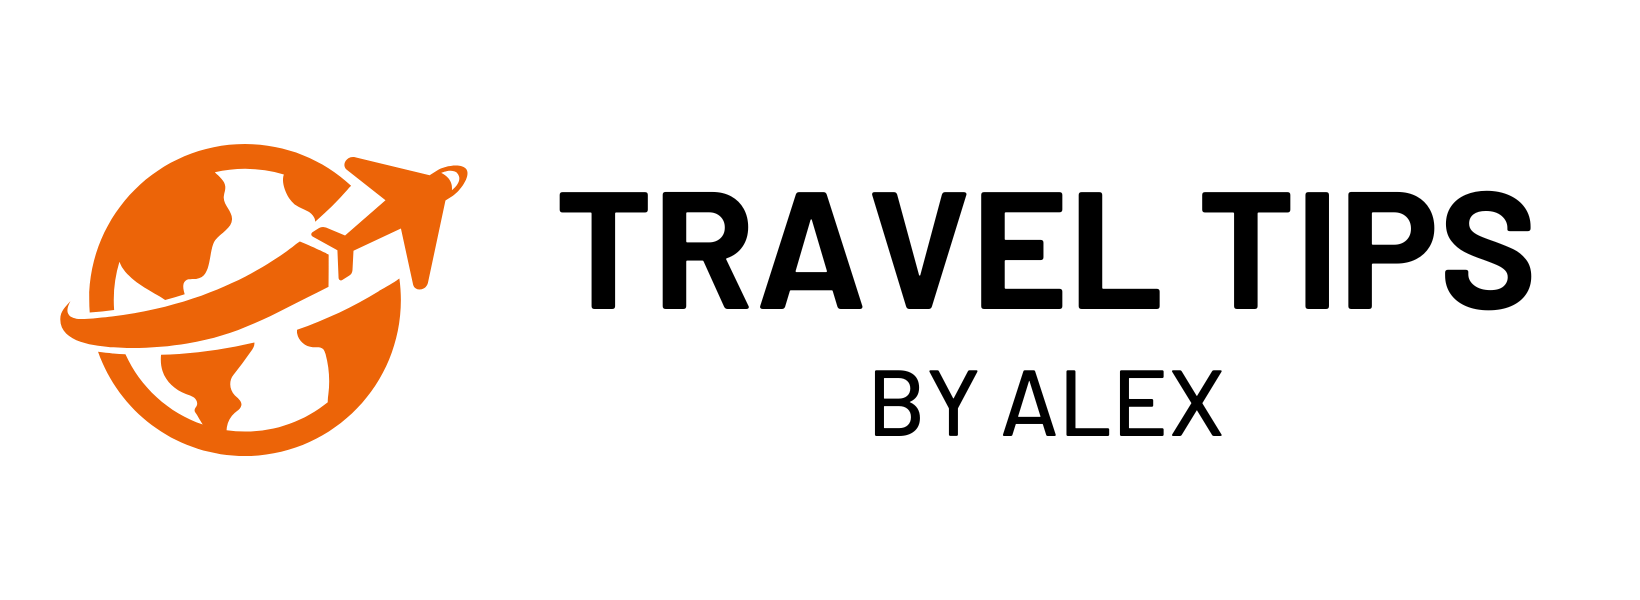 Travel Tips by Alex